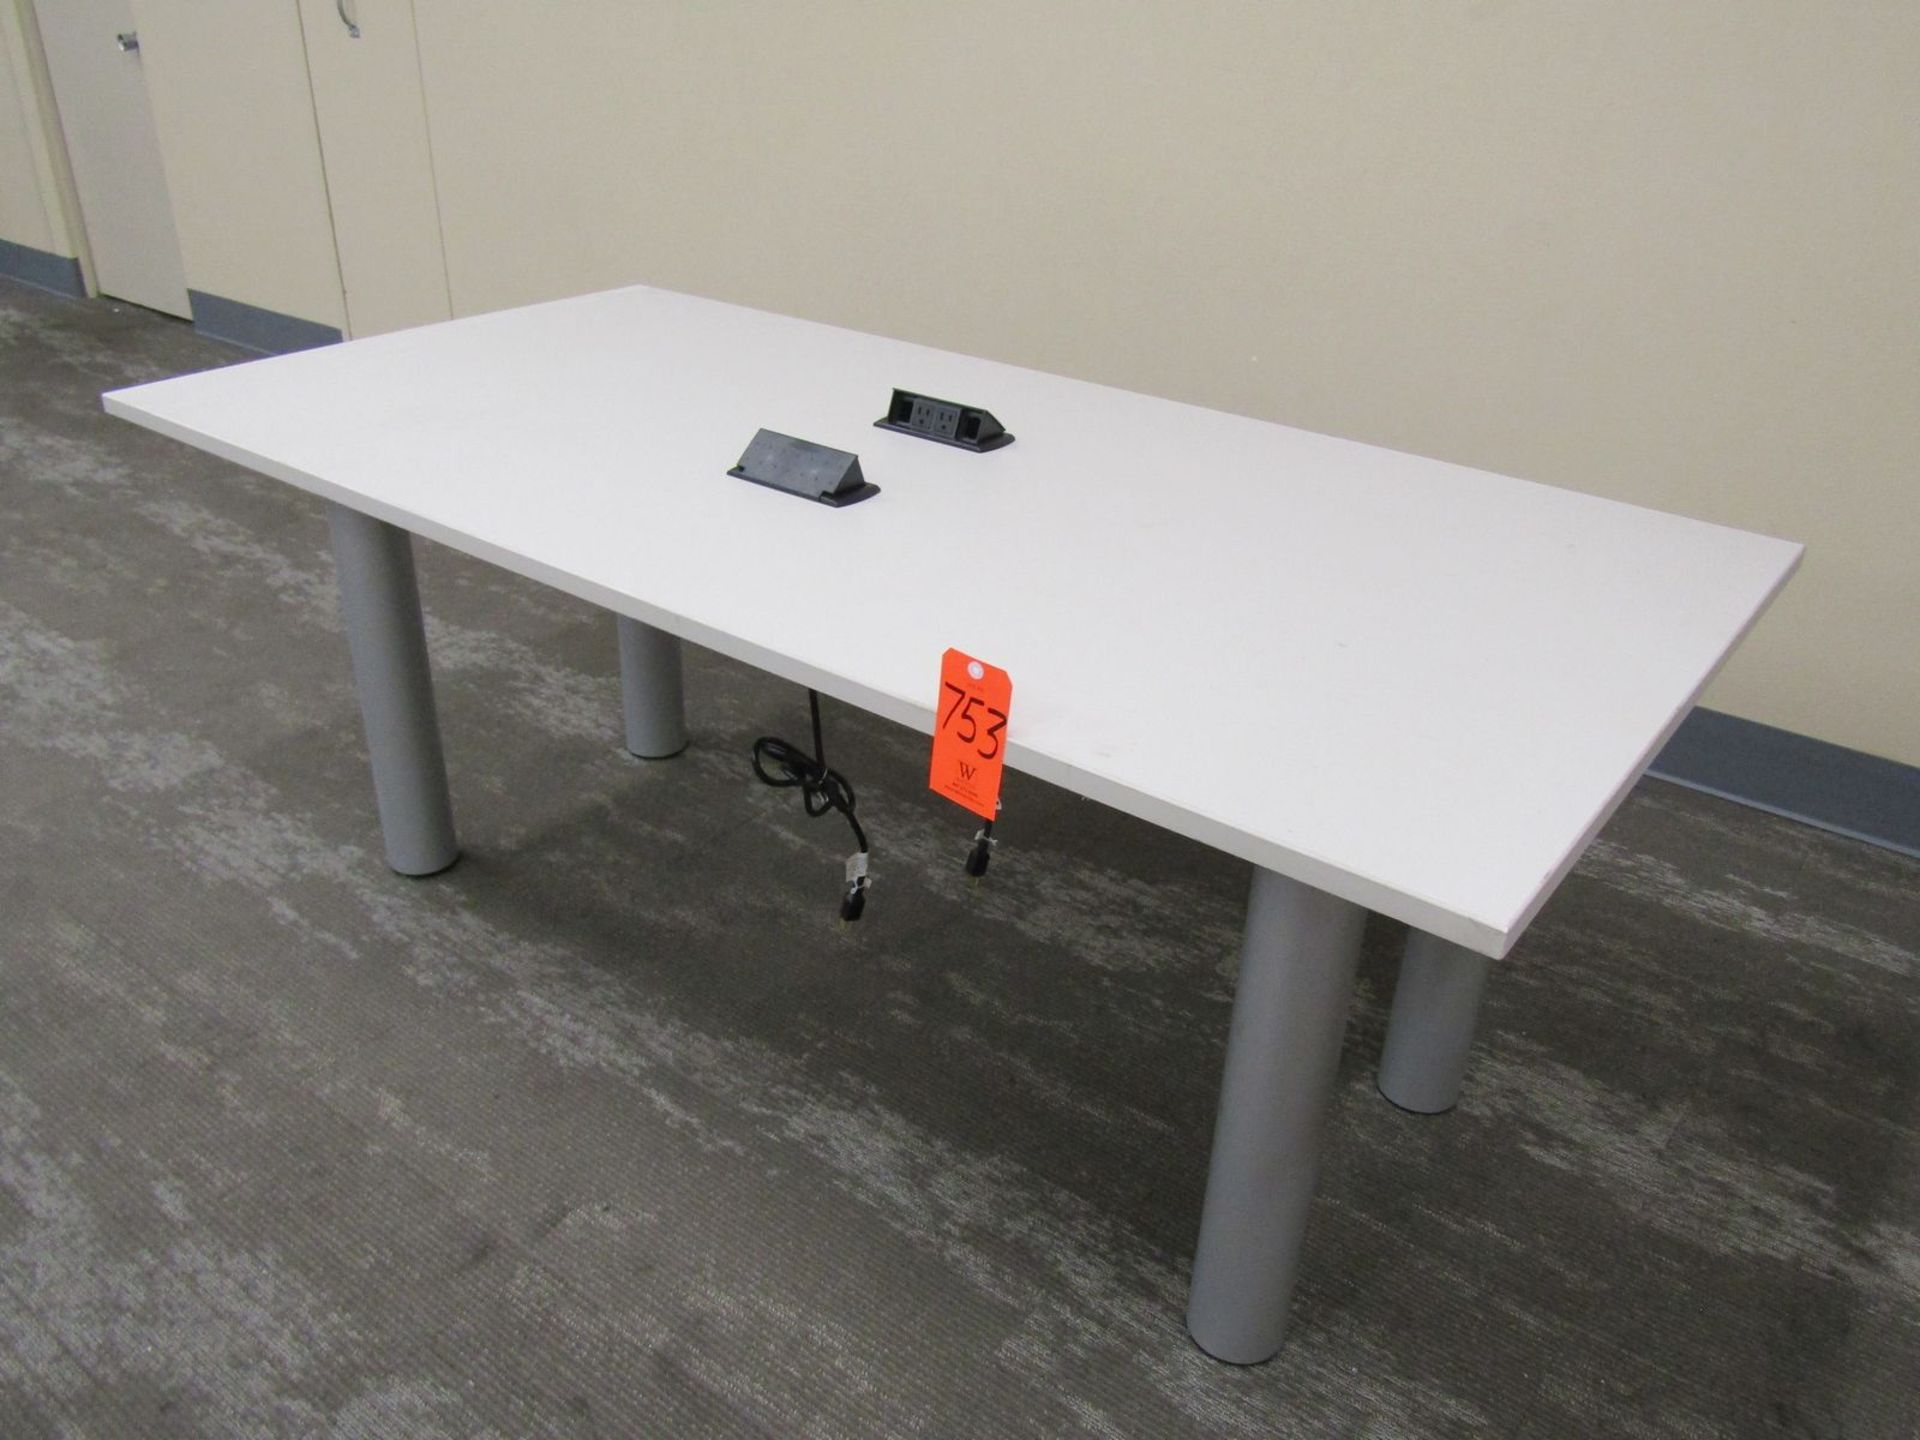 72 in. x 36 in. Office Table with Electrical Outlets